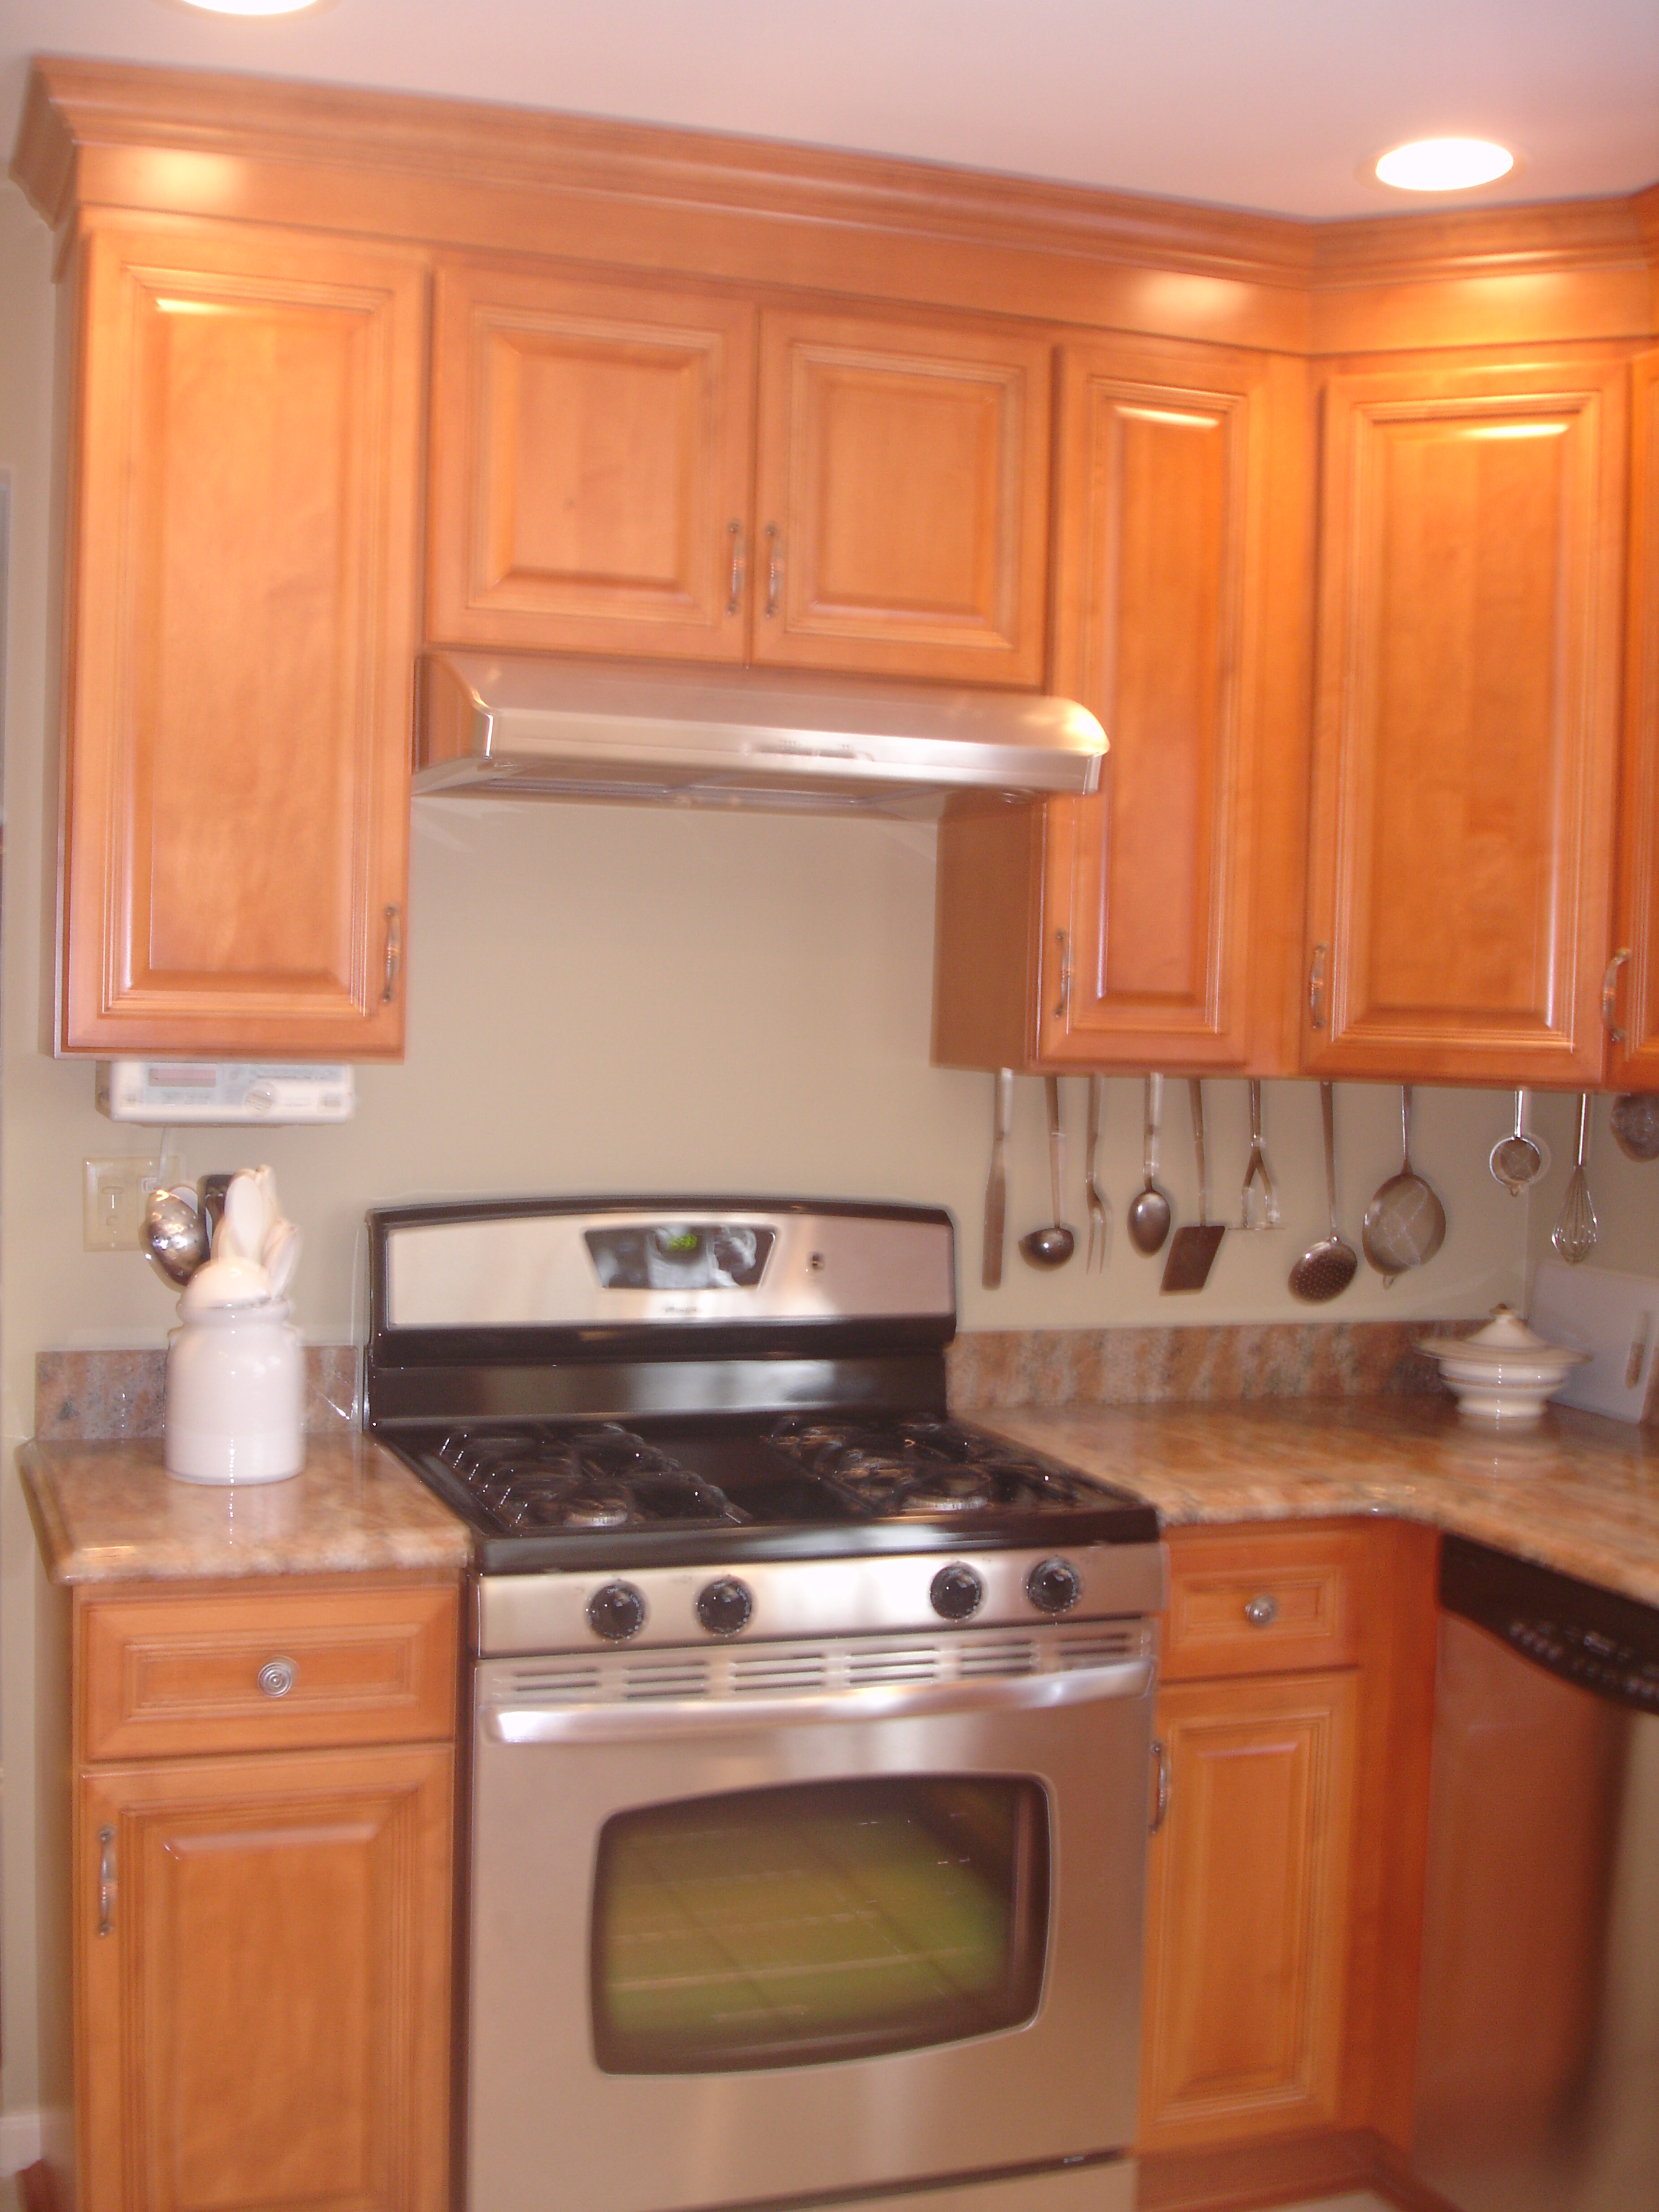 Another Happy Kitchen Customer-May 17 2008